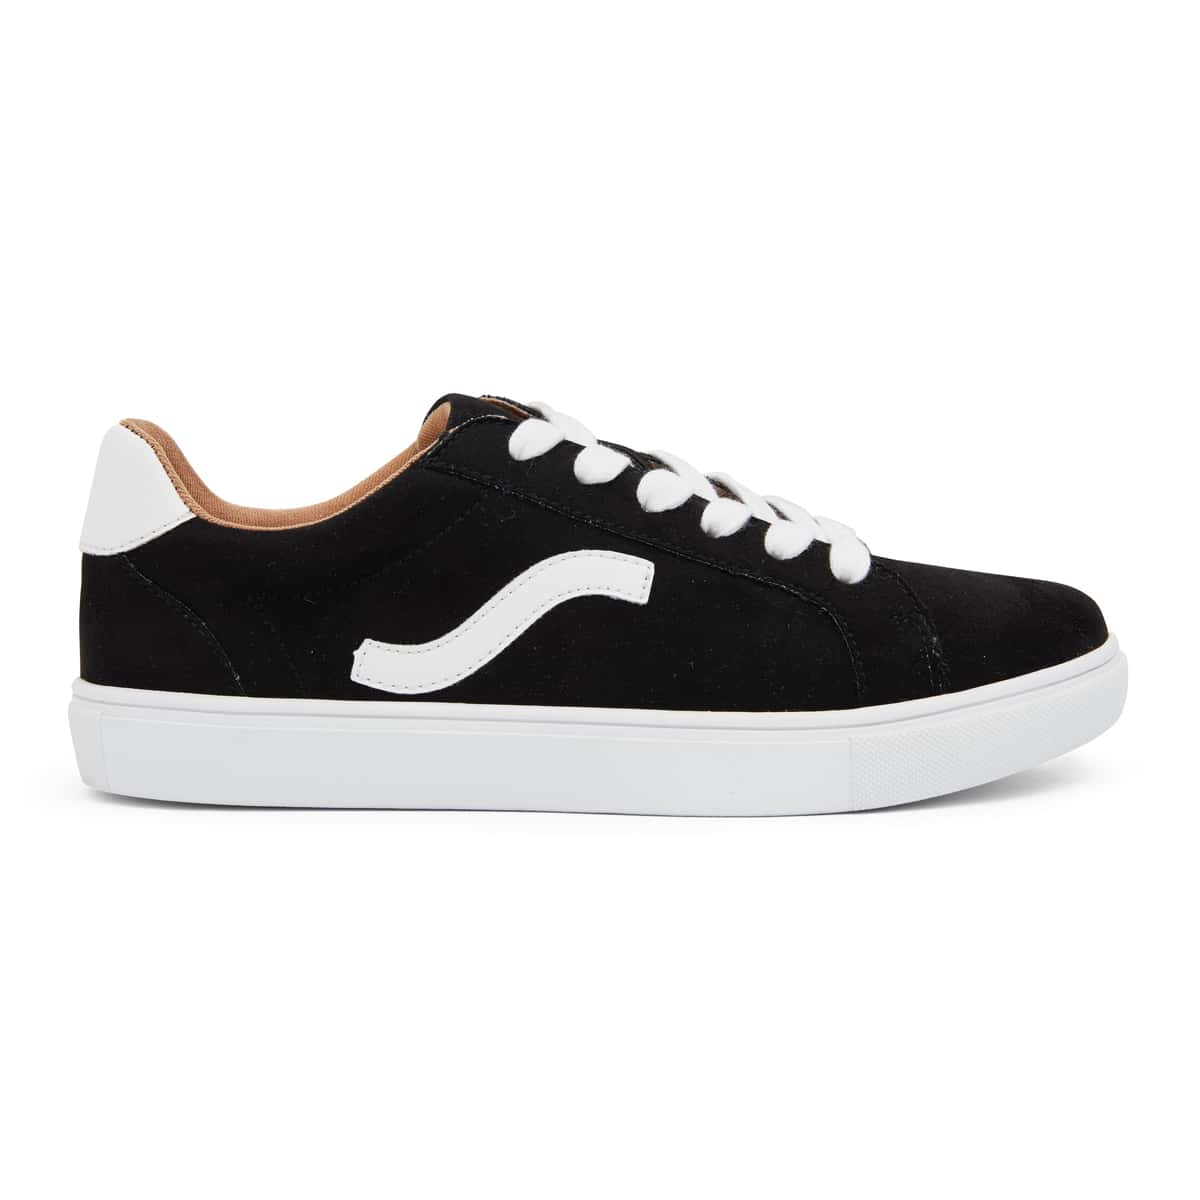 Swerve Sneaker in Black And White Suede